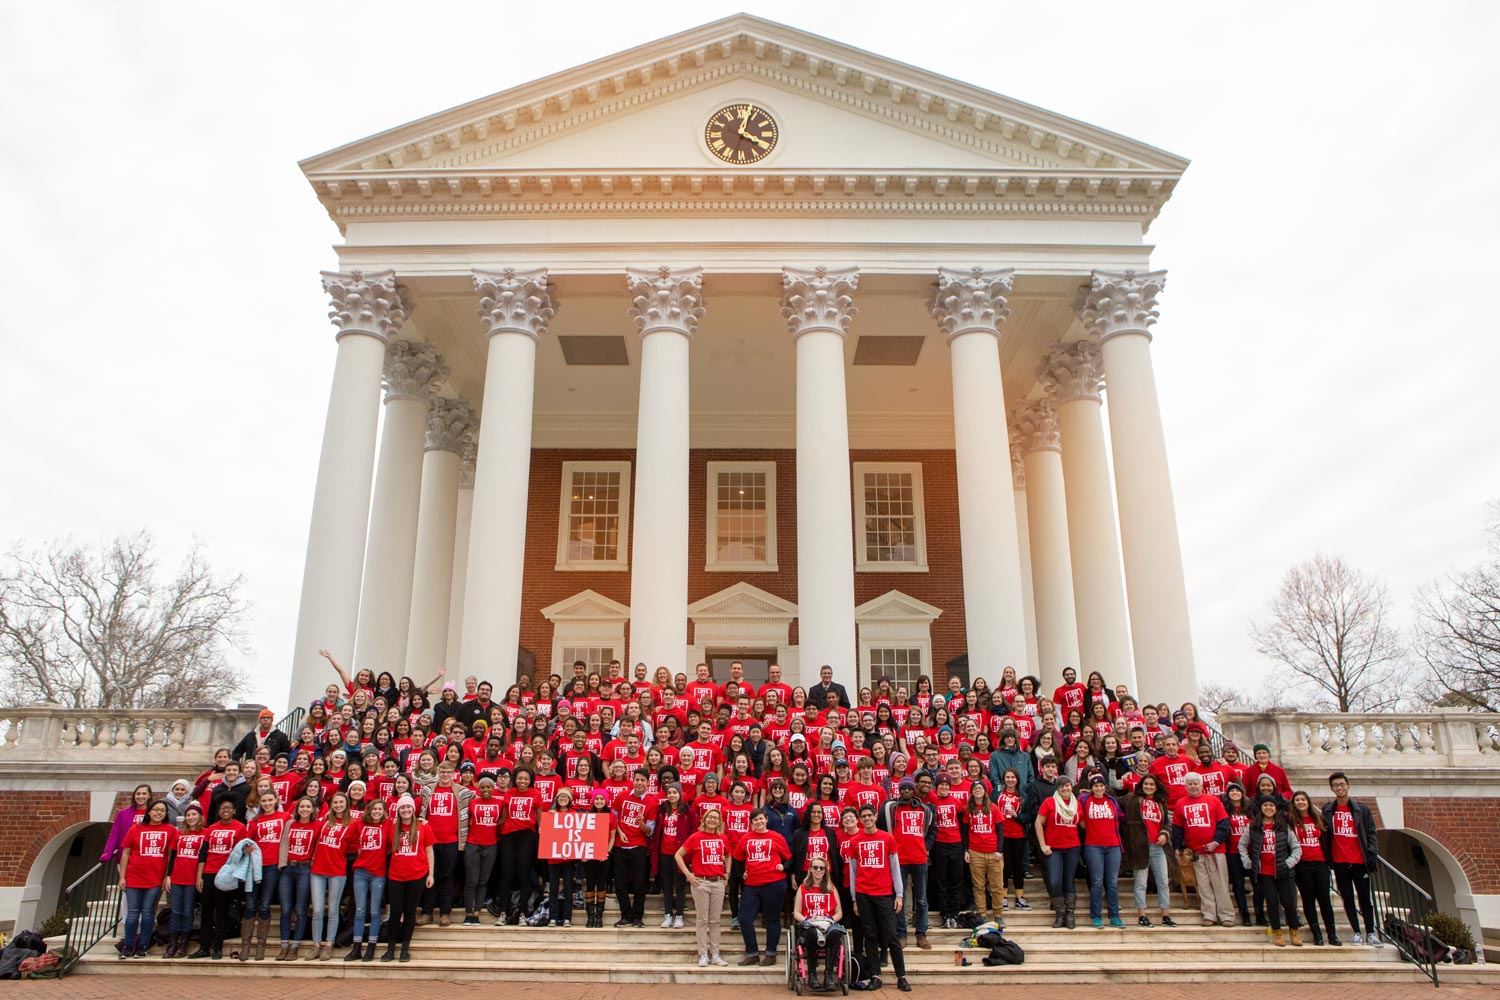 People in Red shirts standing on the Rotunda steps